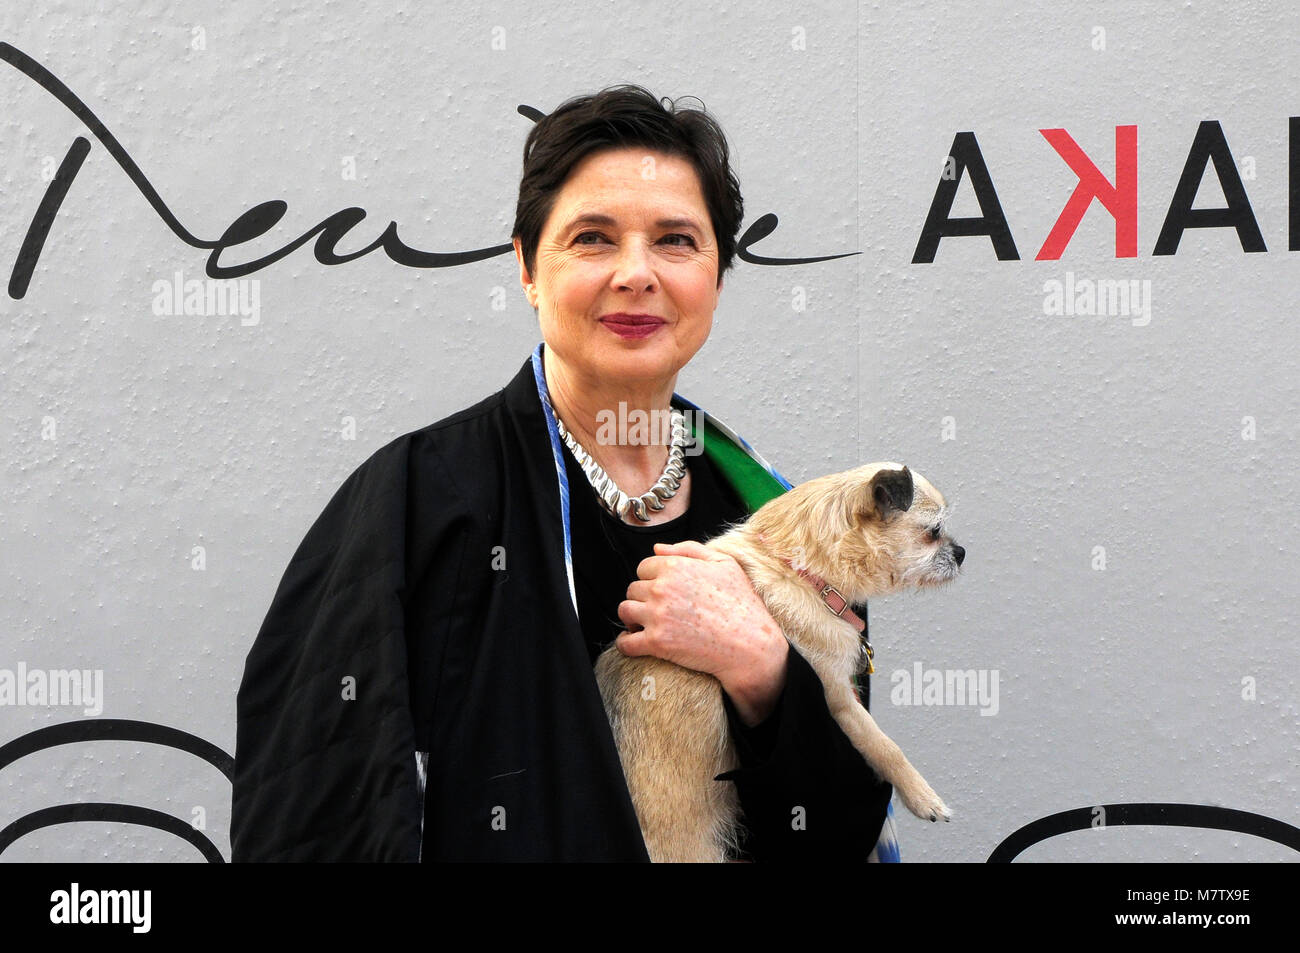 Barcelona, Spain. 12th Mar, 2018. Isabella Rossellini attends the presentation of 'Link Link Circus', with her dog Pan, the new show of Isabella Rosellini, at Theater Akademia on March 12, 2018 in Barcelona, Spain. foto: Rosmi Duaso/Alamy live news Stock Photo